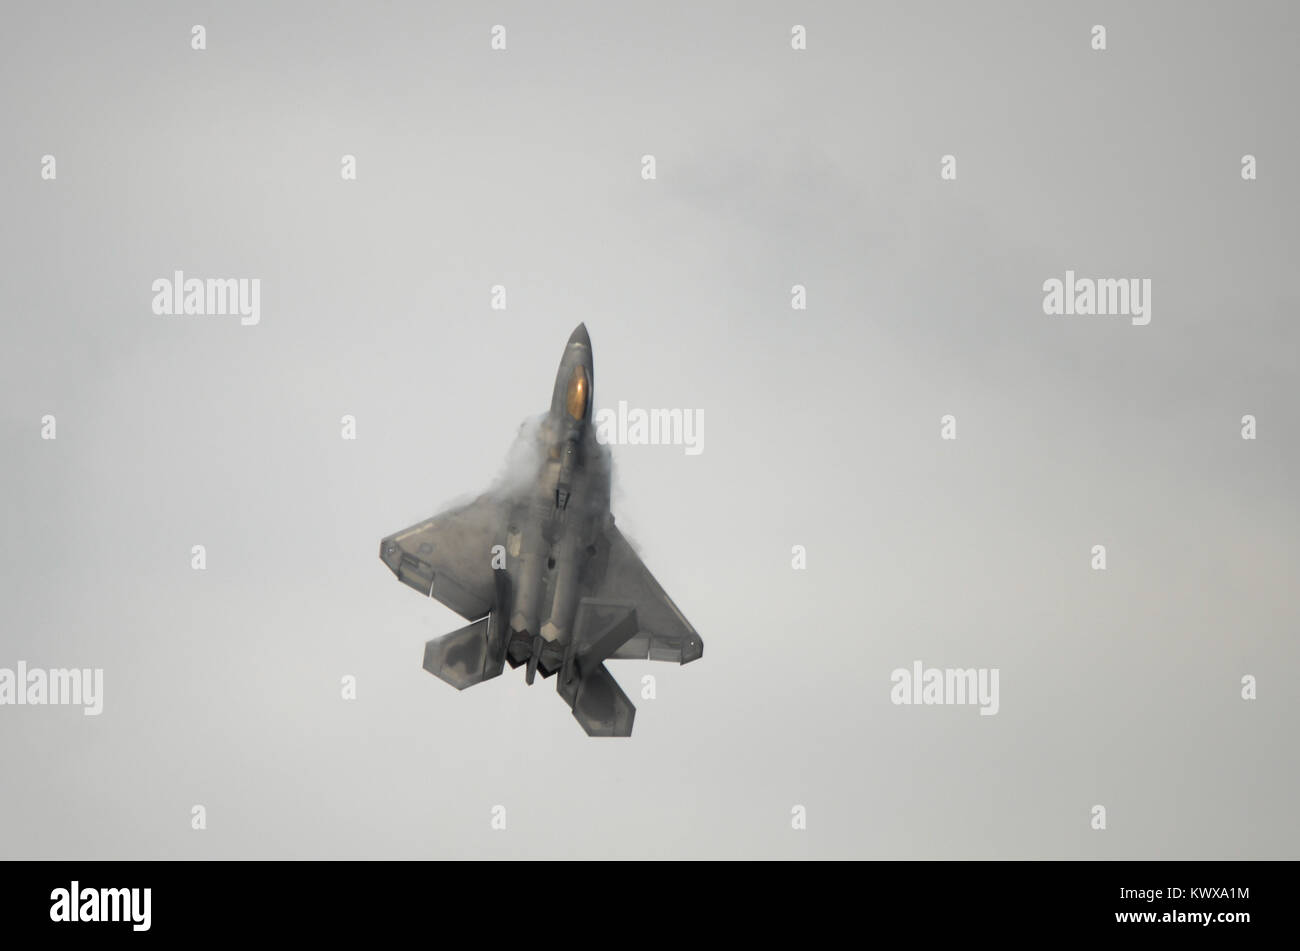 An F22 Raptor fighter jet climbs vertically. Cloud and condensation forms on the wings. Stock Photo